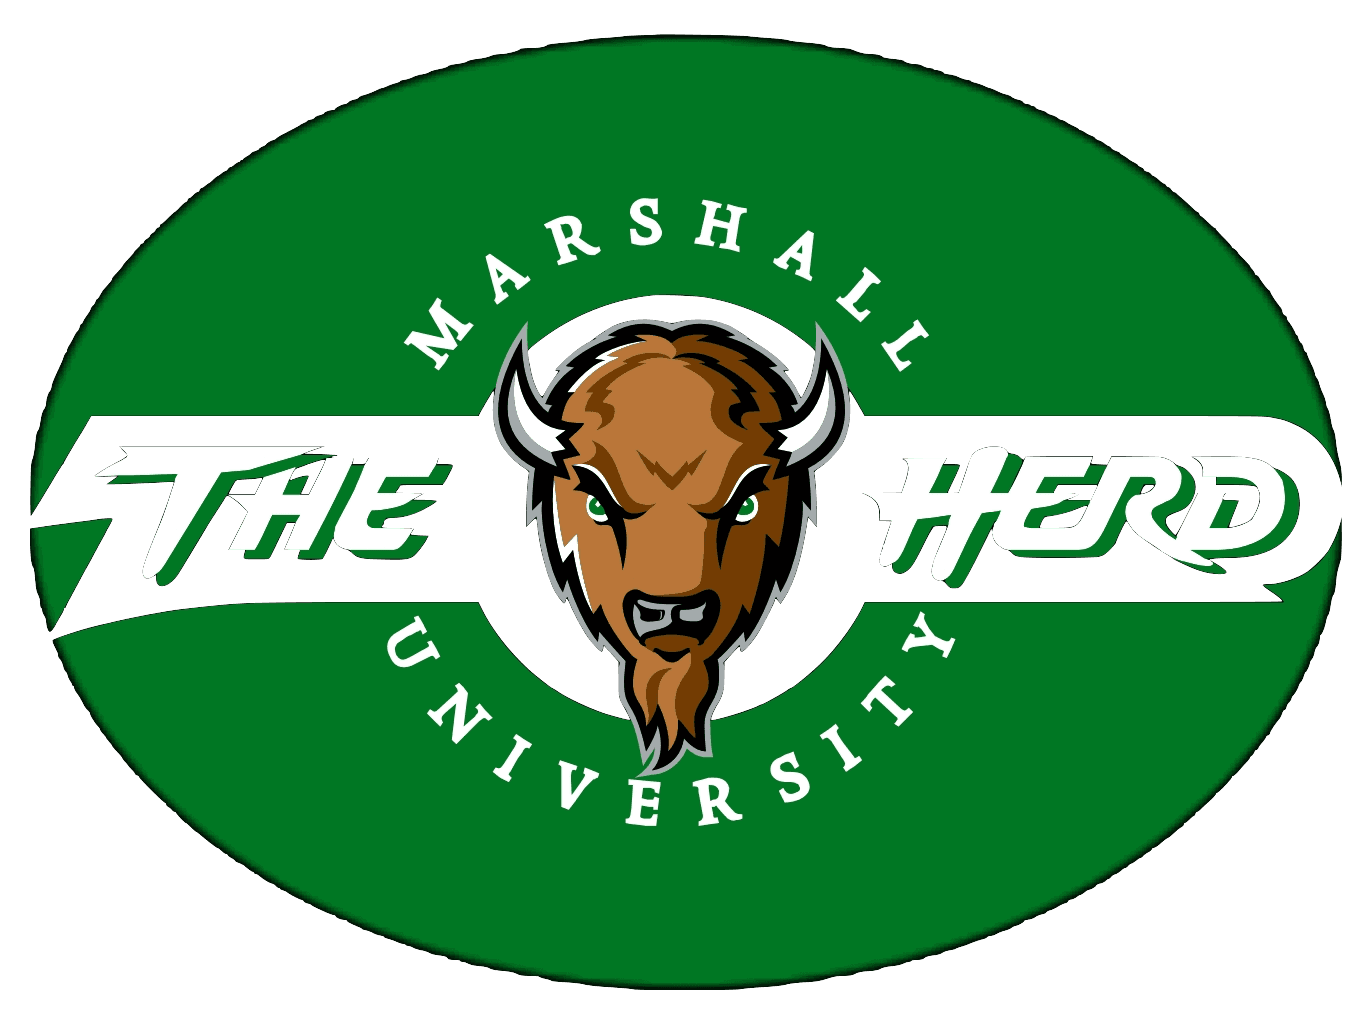 A logo for marshall university with a buffalo on it